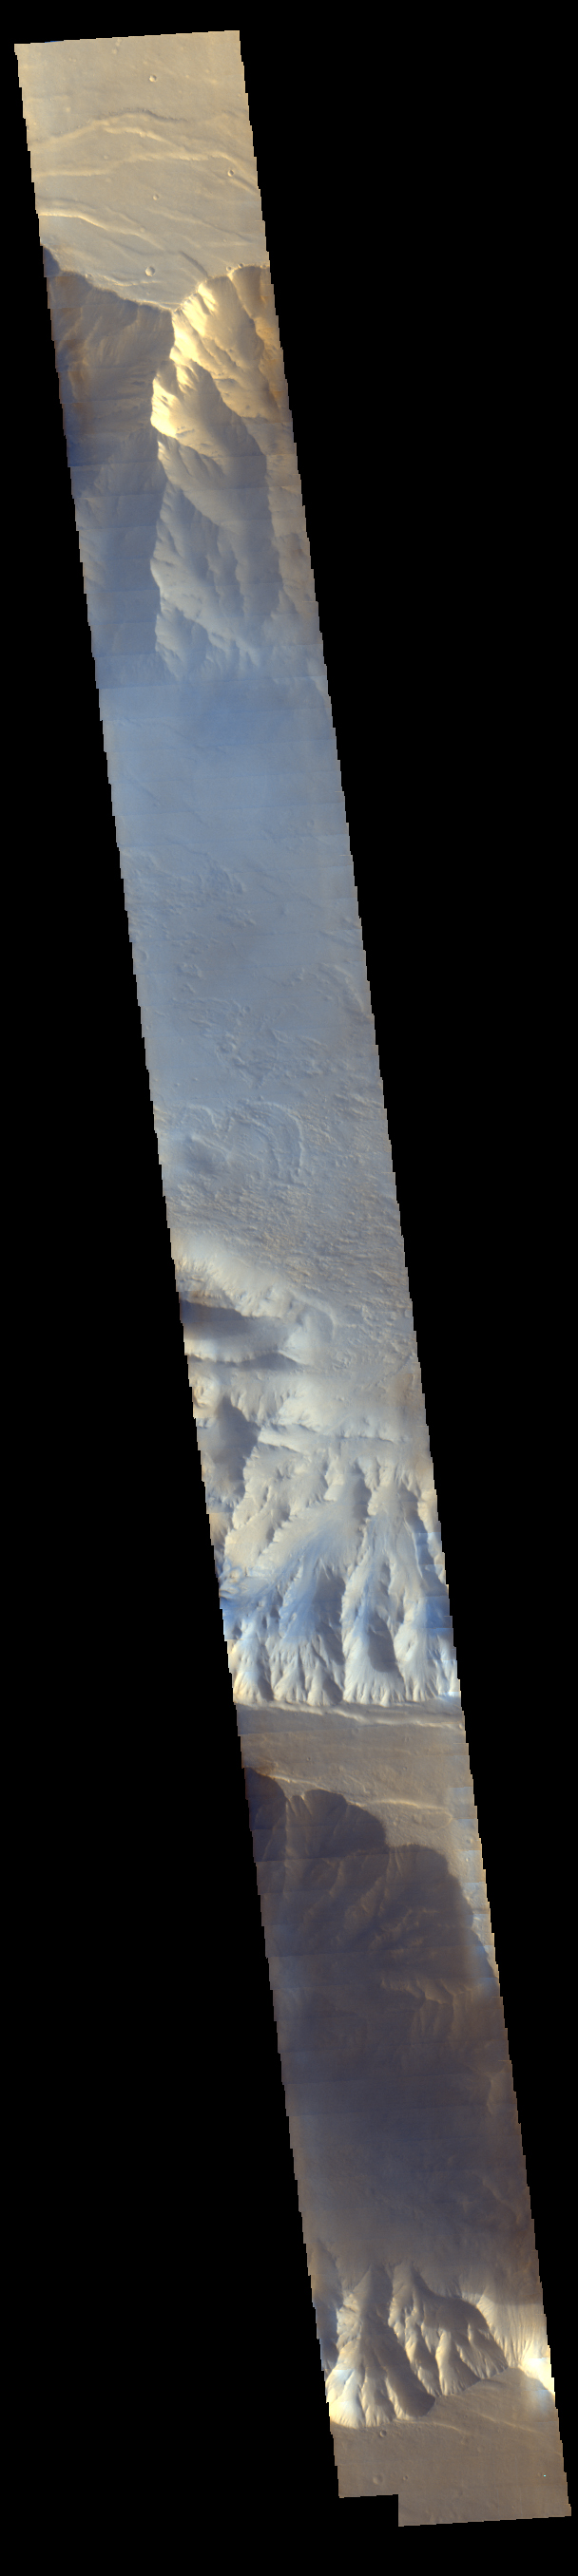 Mars Odyssey View of Morning Clouds in Canyon